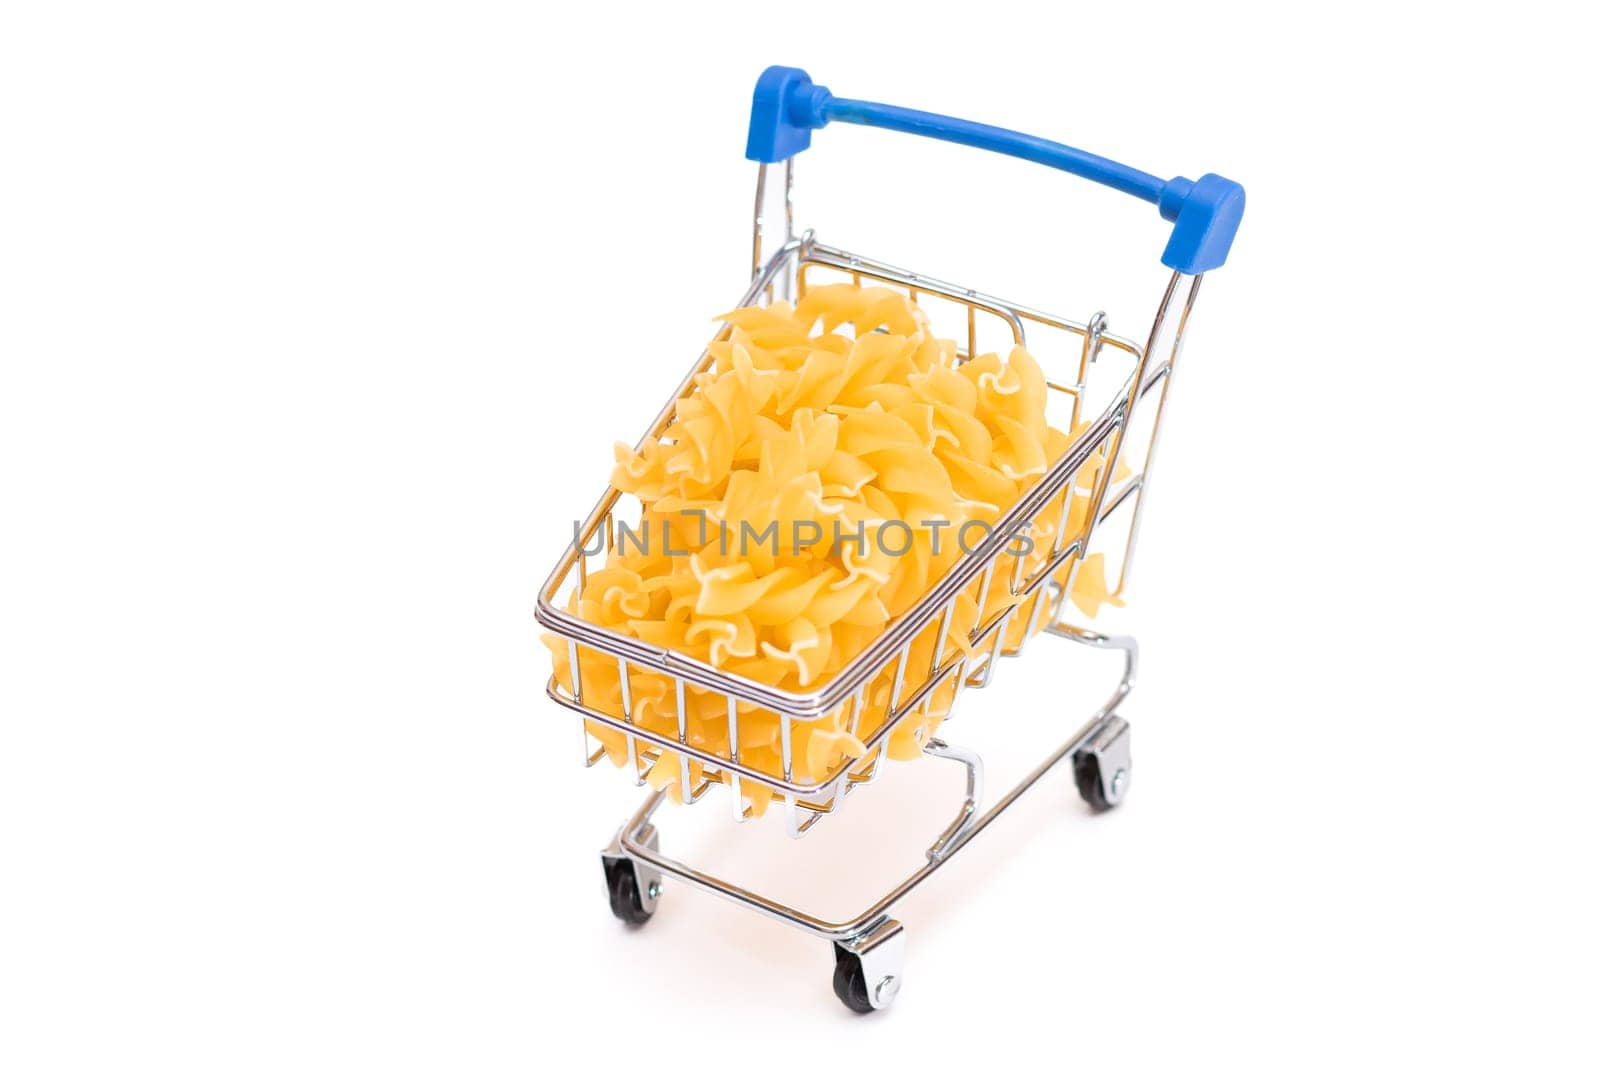 Uncooked Fusilli Pasta in Small Shopping Cart Isolated on White Background. A Crisis: Buying Cheap Food. Classic Dry Spiral Macaroni. Italian Culture and Cuisine. Raw Pasta - Isolation